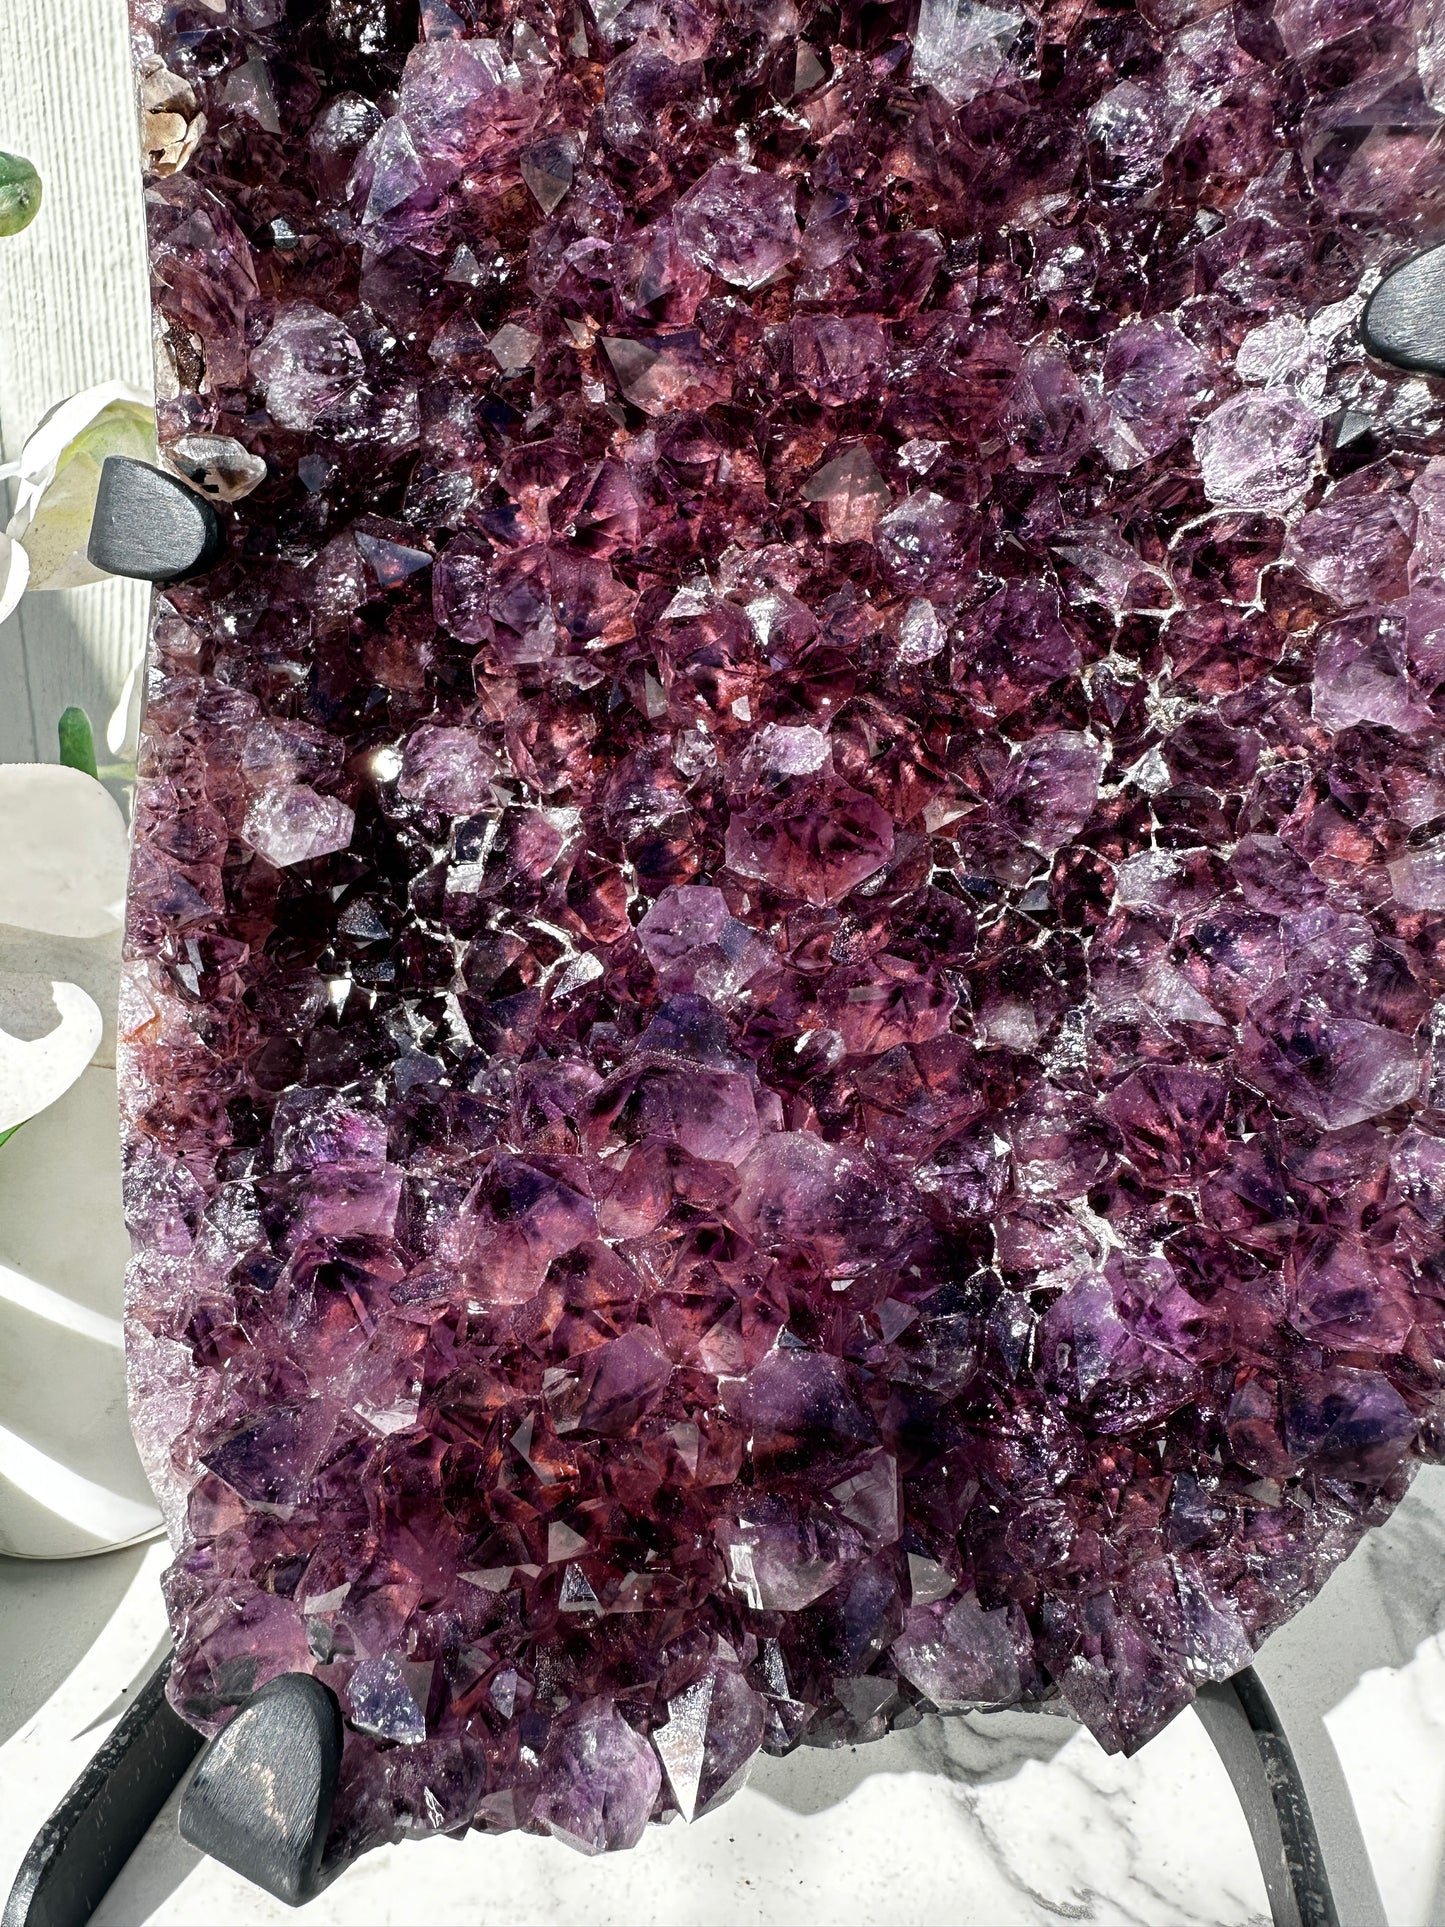 Purple Amethyst cluster with Calcite formation on stand